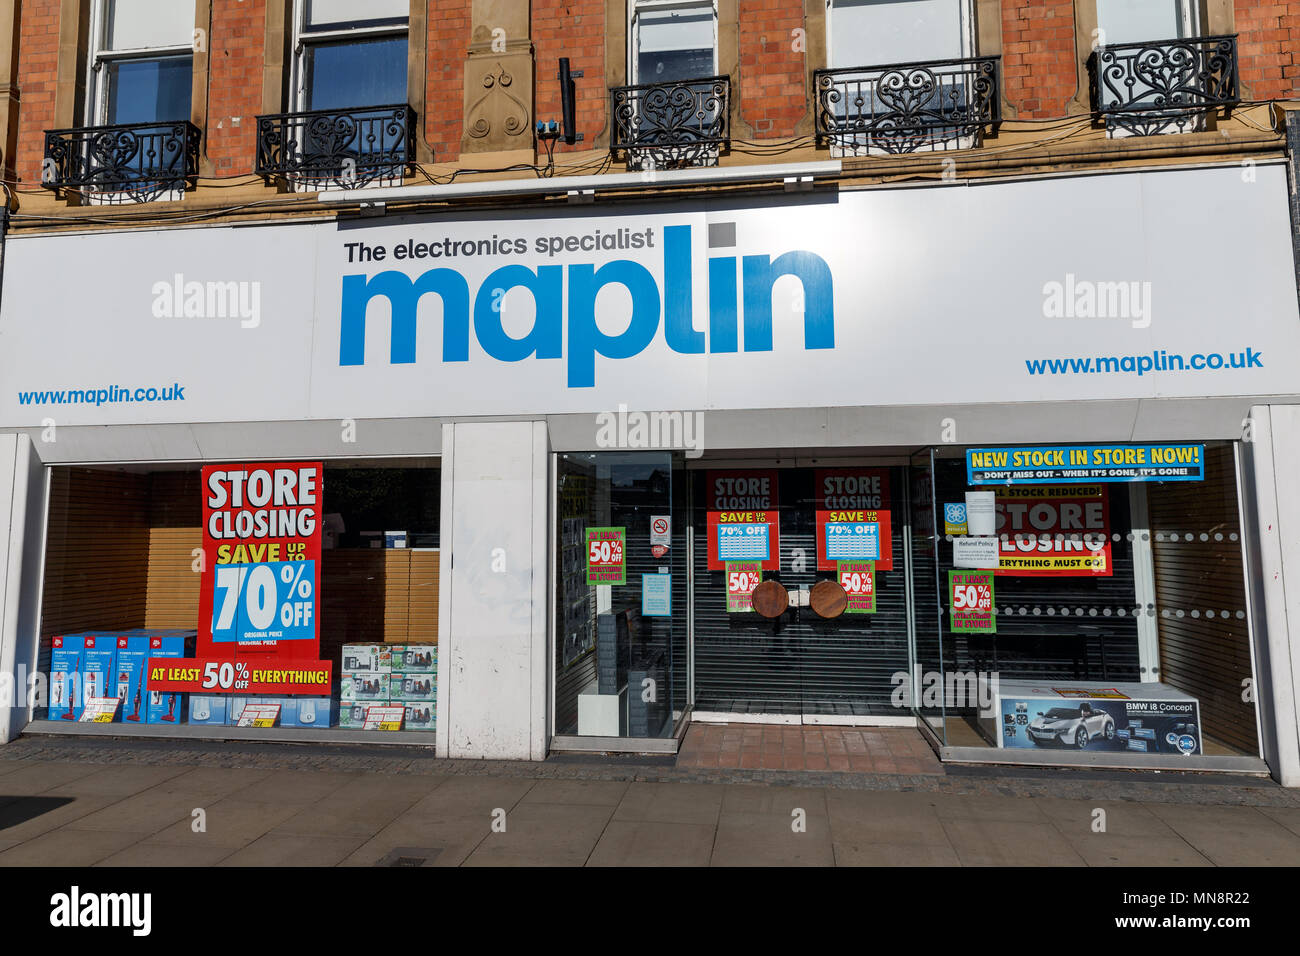 A branch of the former electronic goods chain Maplin in the United Kingdom, pictured in 2018 while advertising a store closing sale. Stock Photo